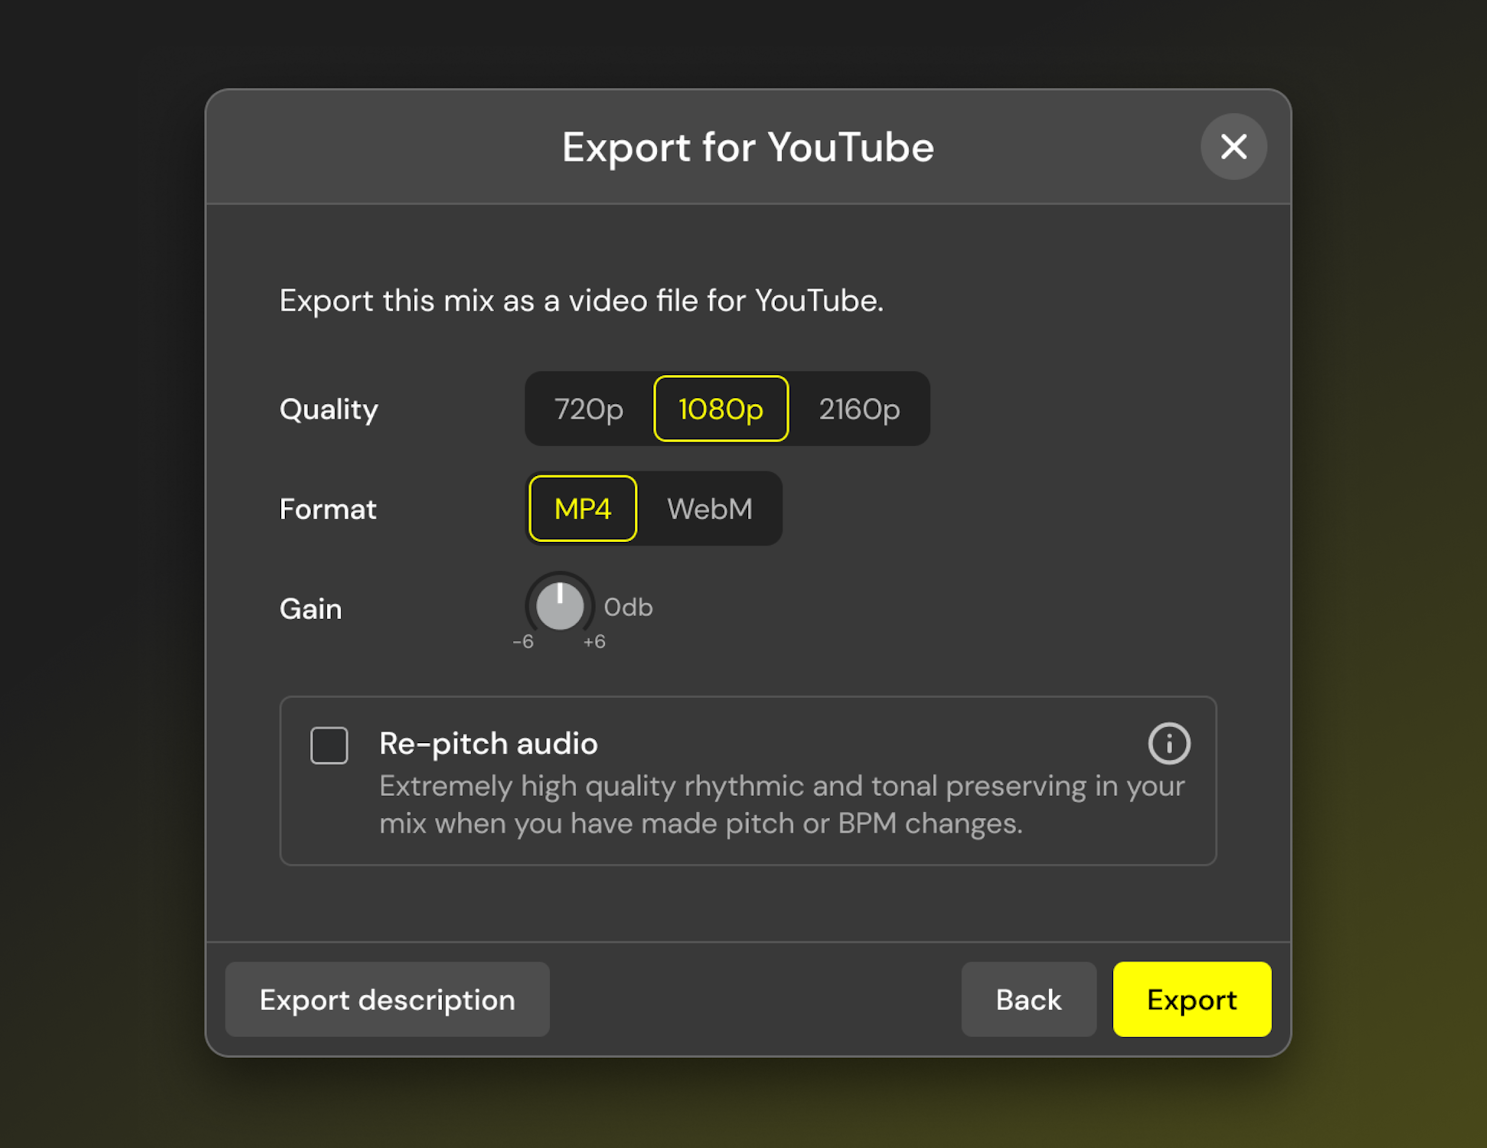 Export for YouTube